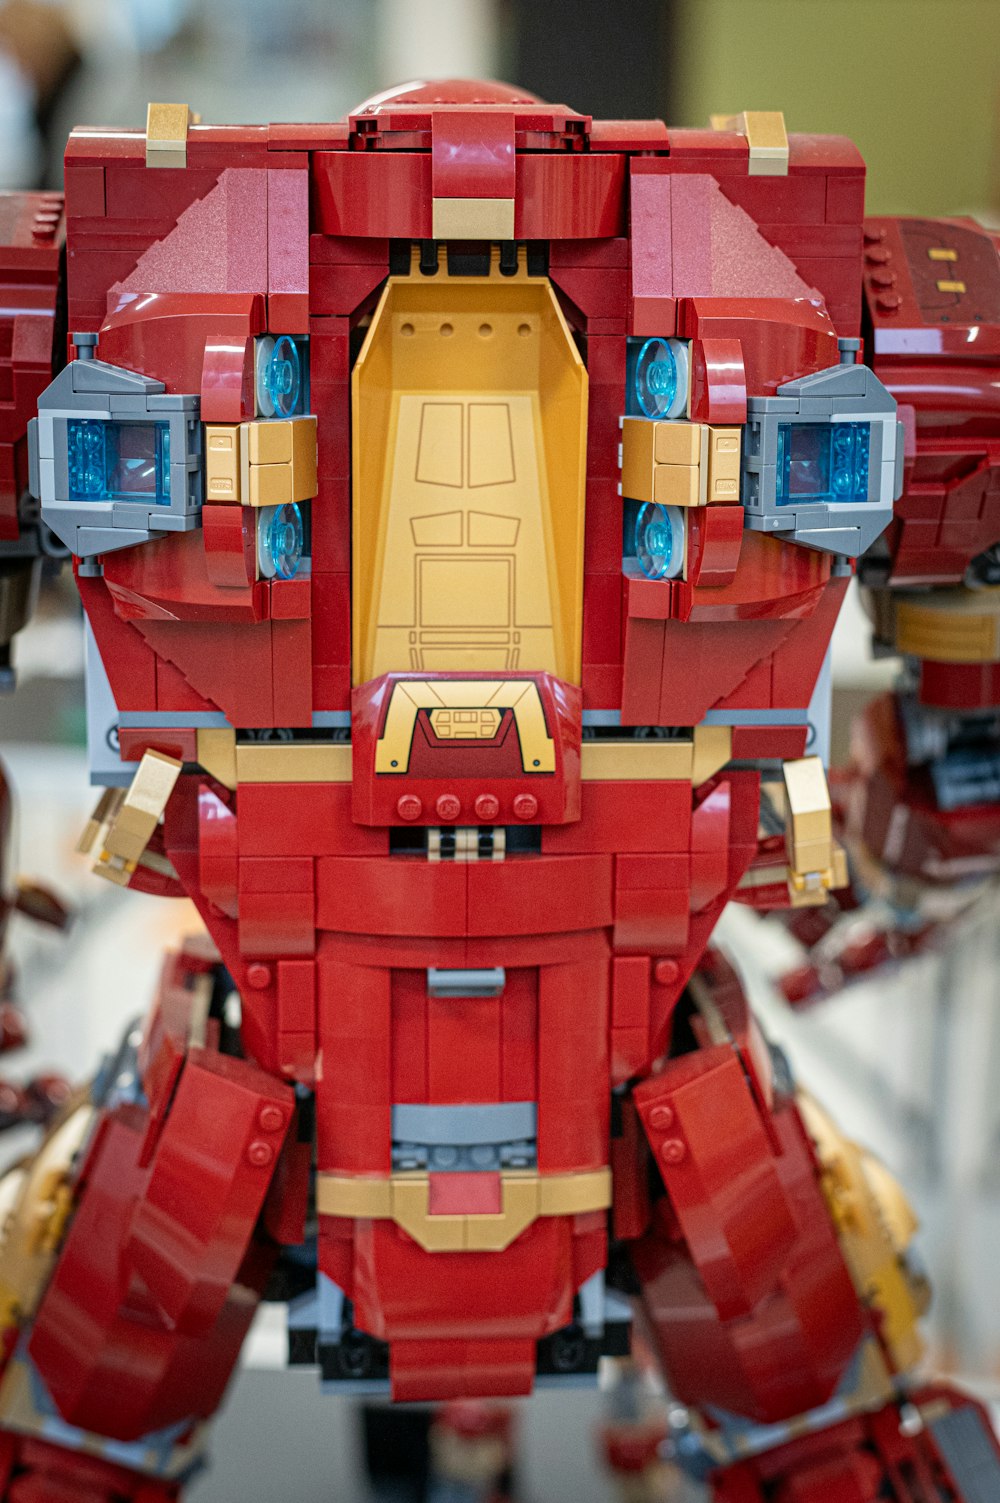 a close up of a red and yellow lego robot